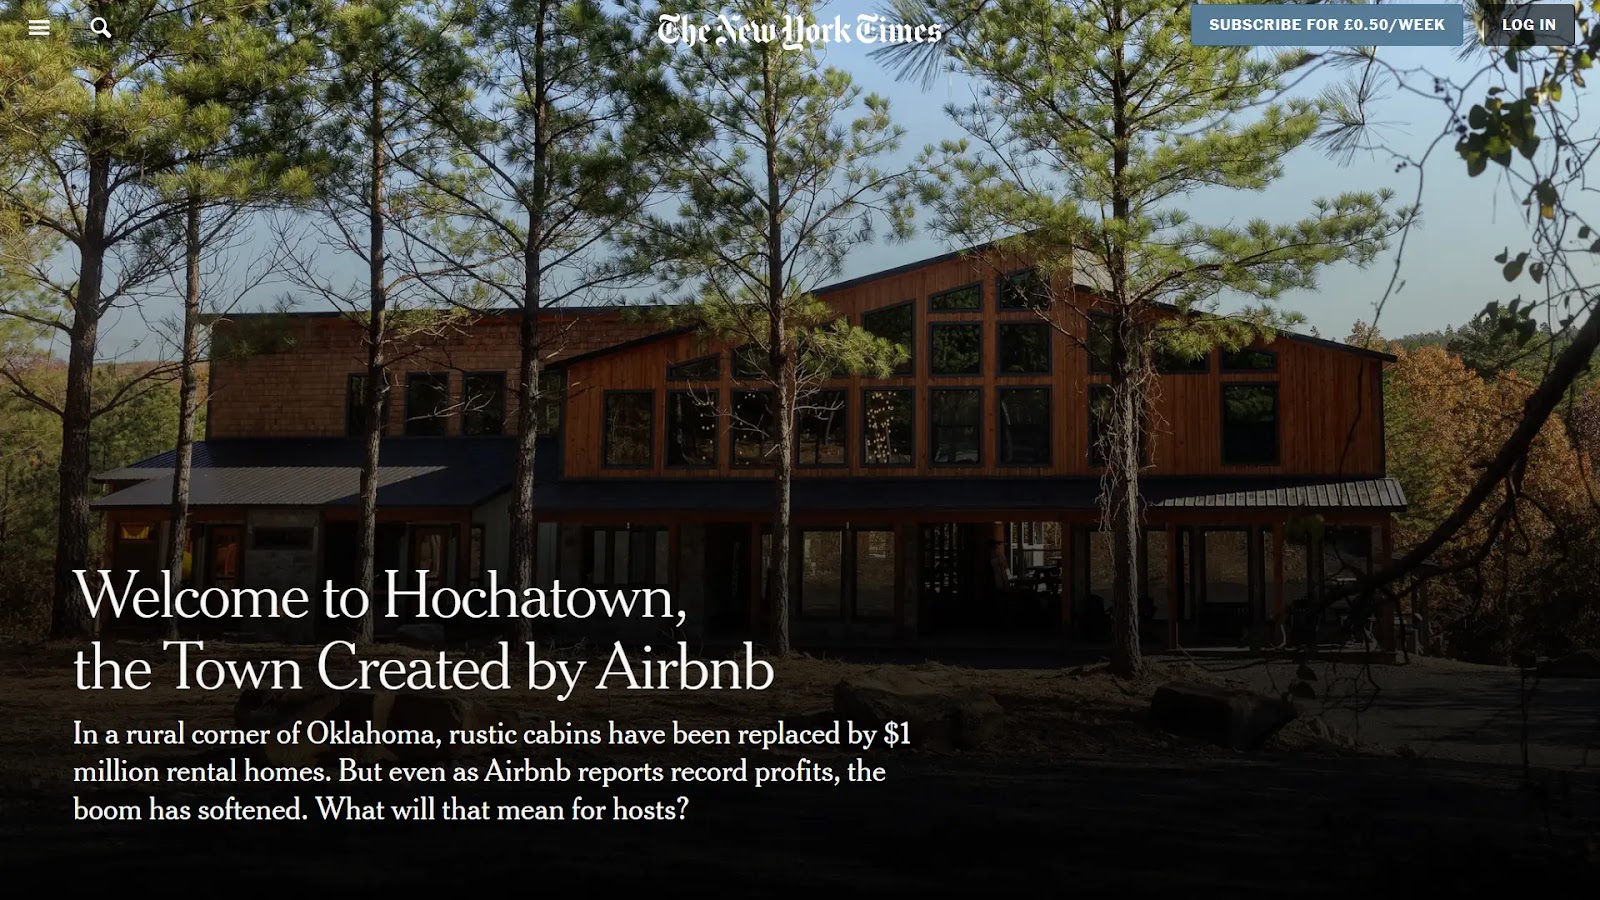 An article about Airbnb on The New York Times website